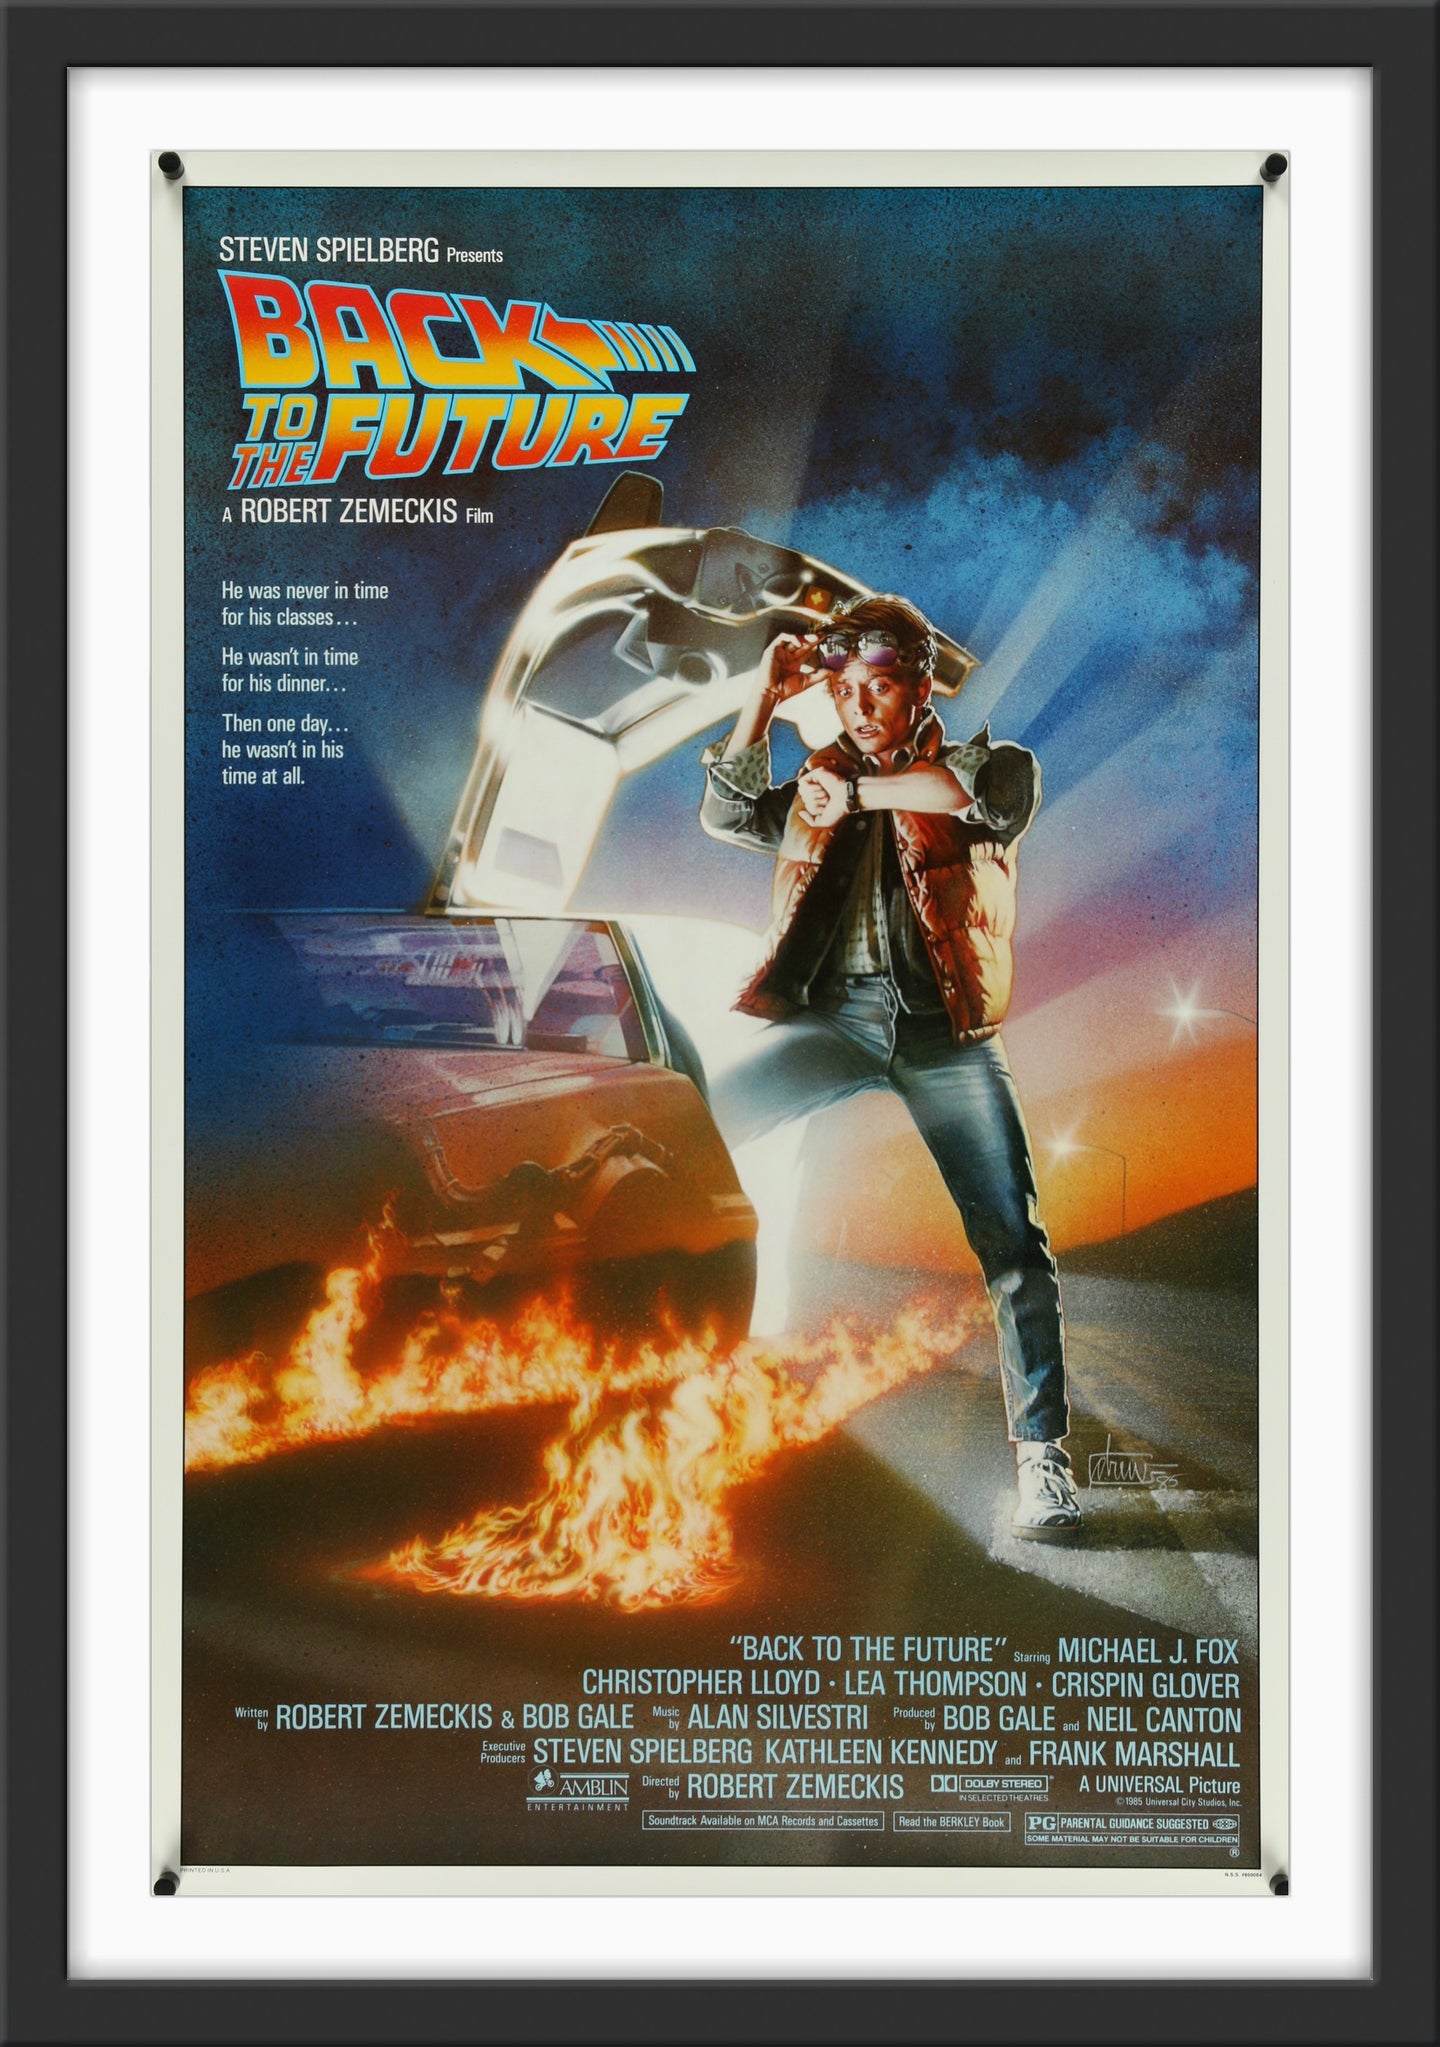 An original movie poster for the film Back To The Future